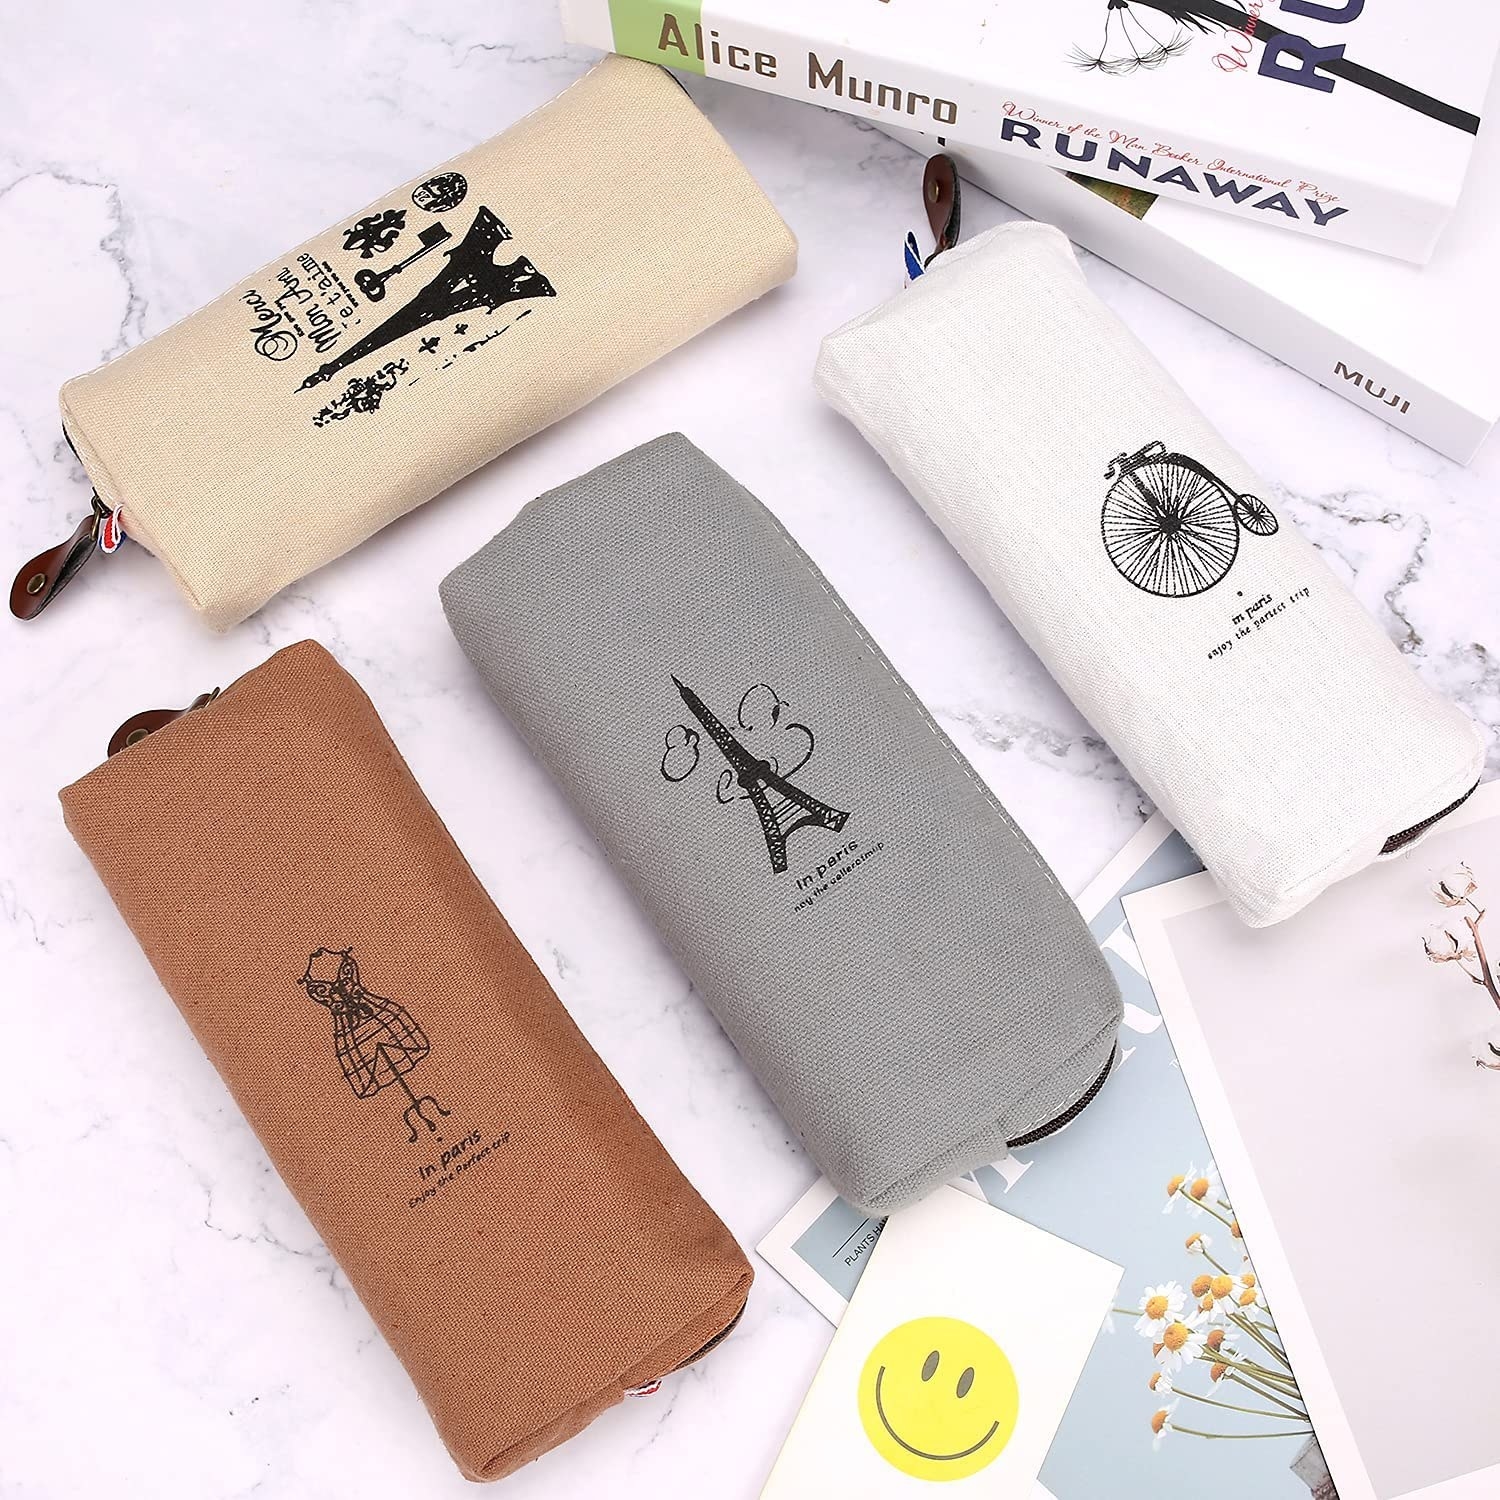 slim pencil pouches with Paris inspired designs on them